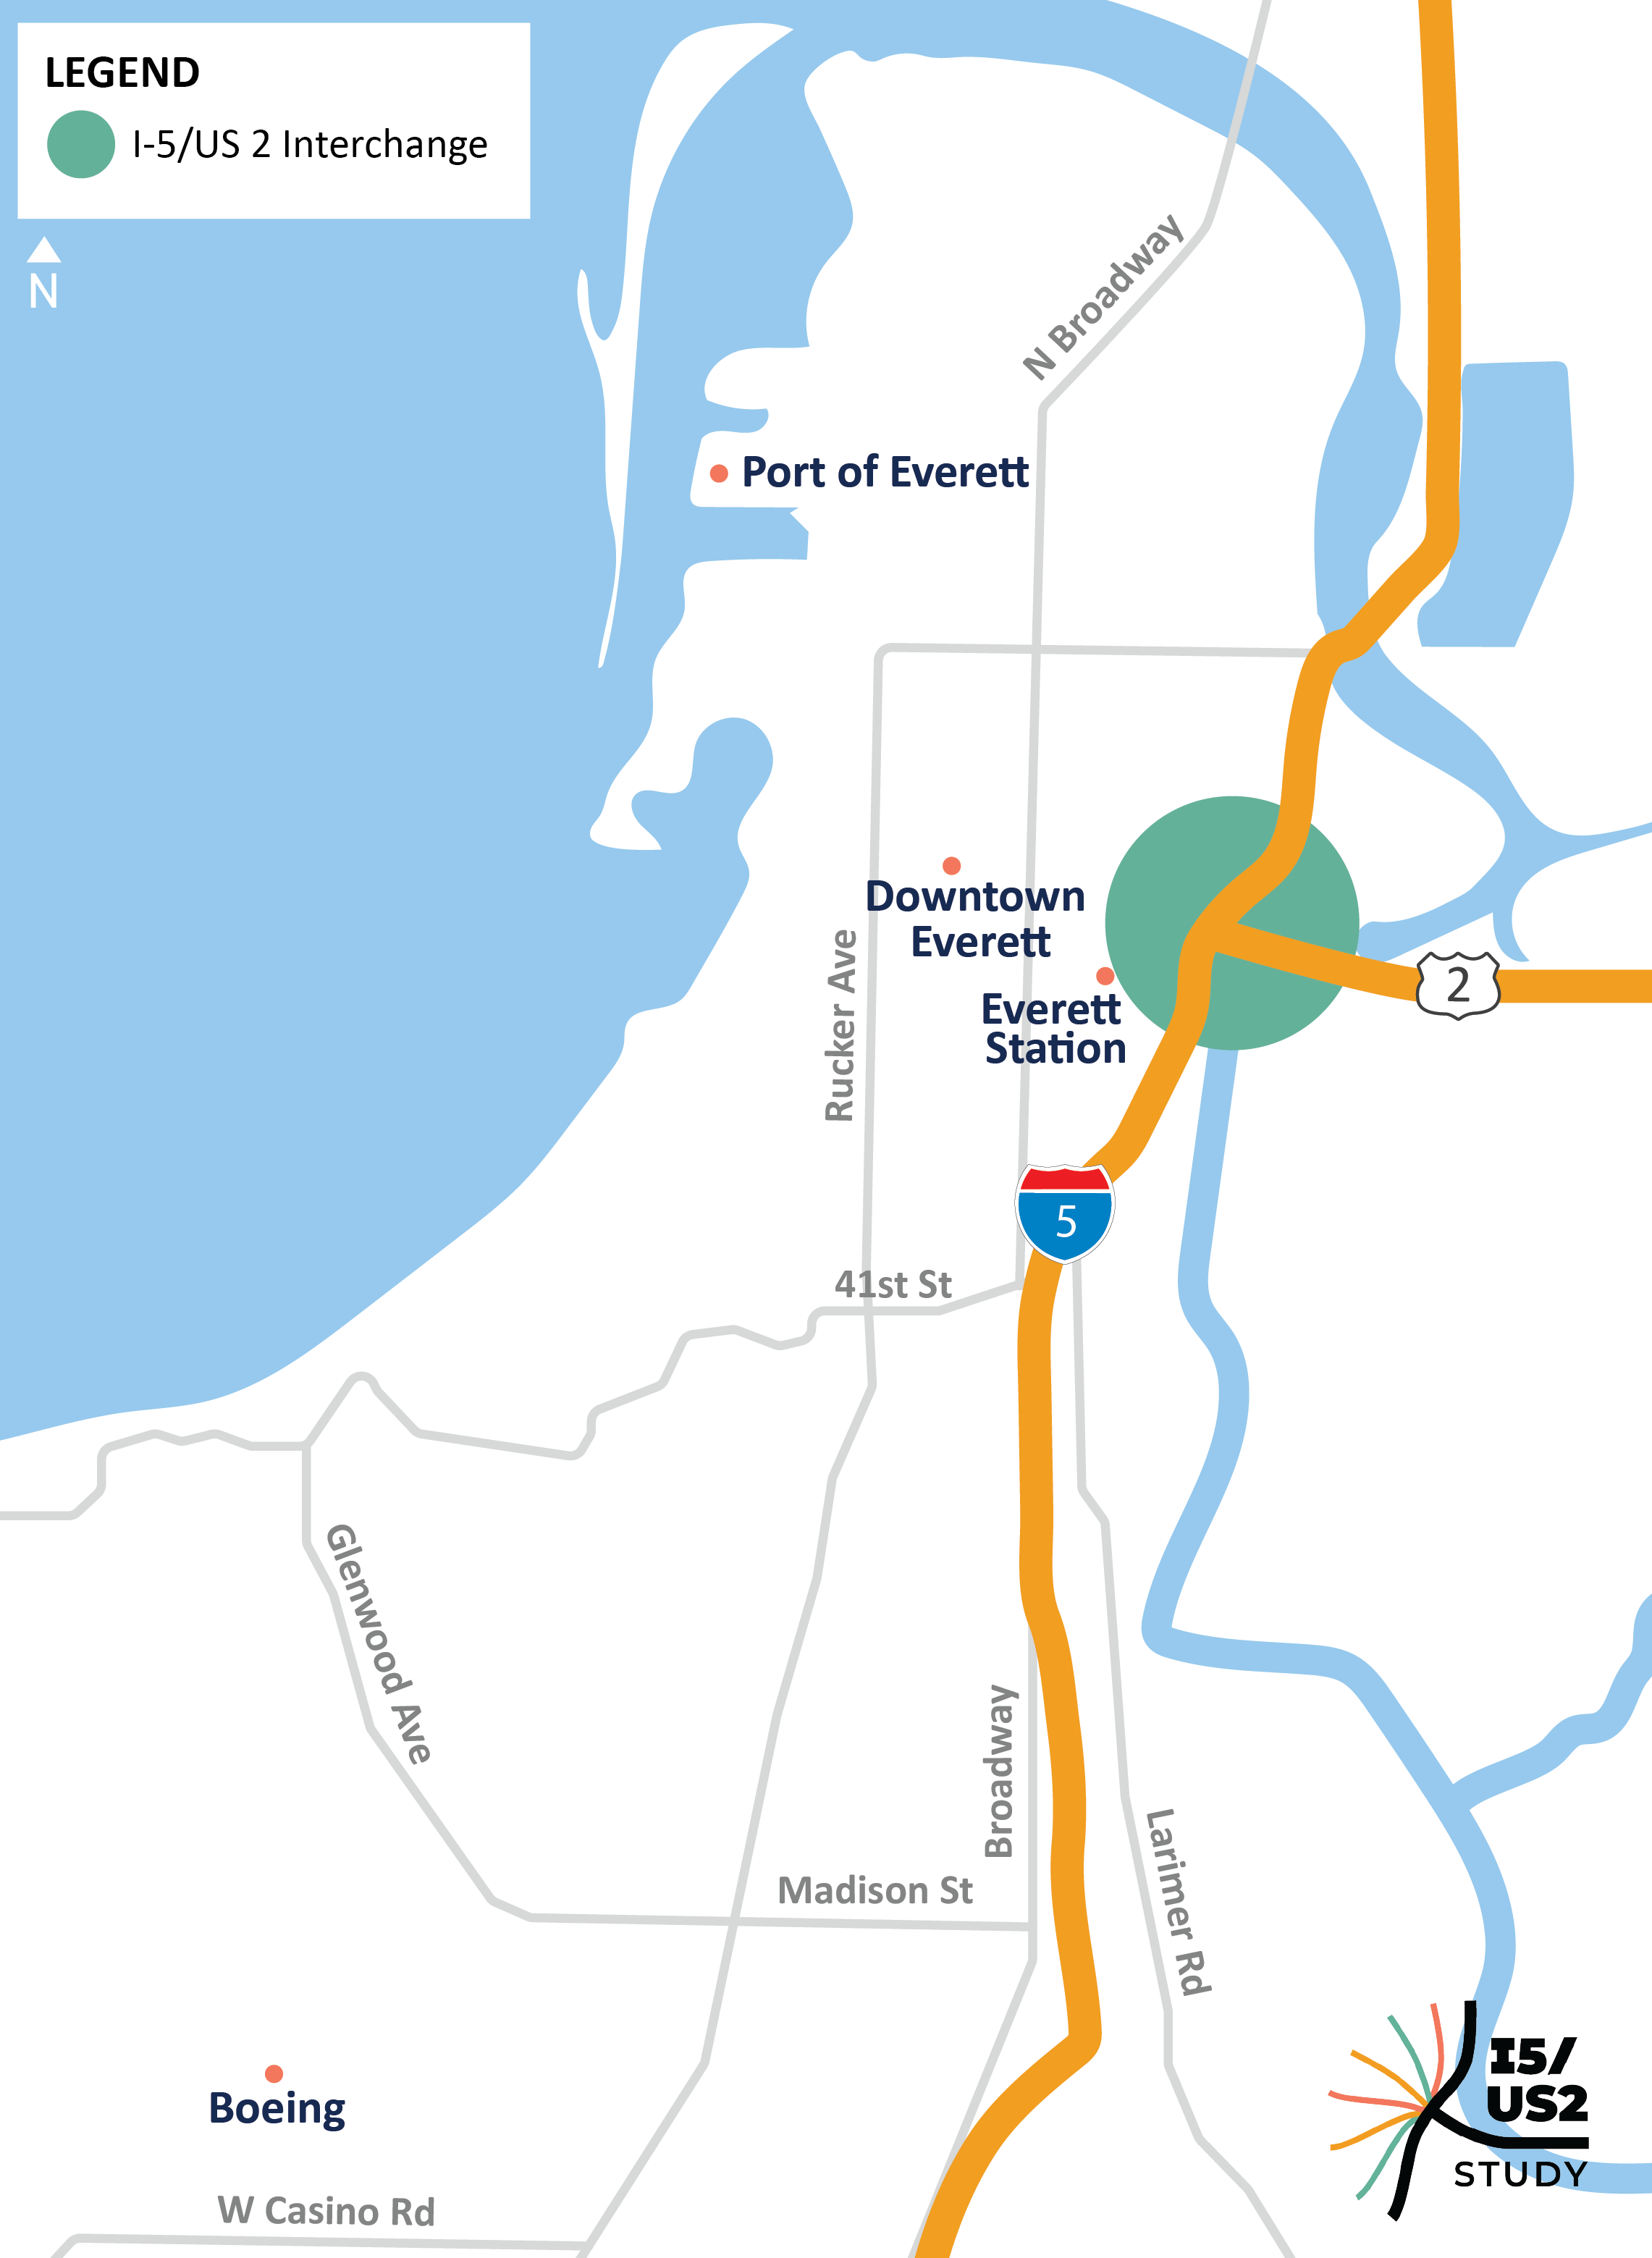 Map of Everett that shows where the I-5 and US 2 Interchange meet.